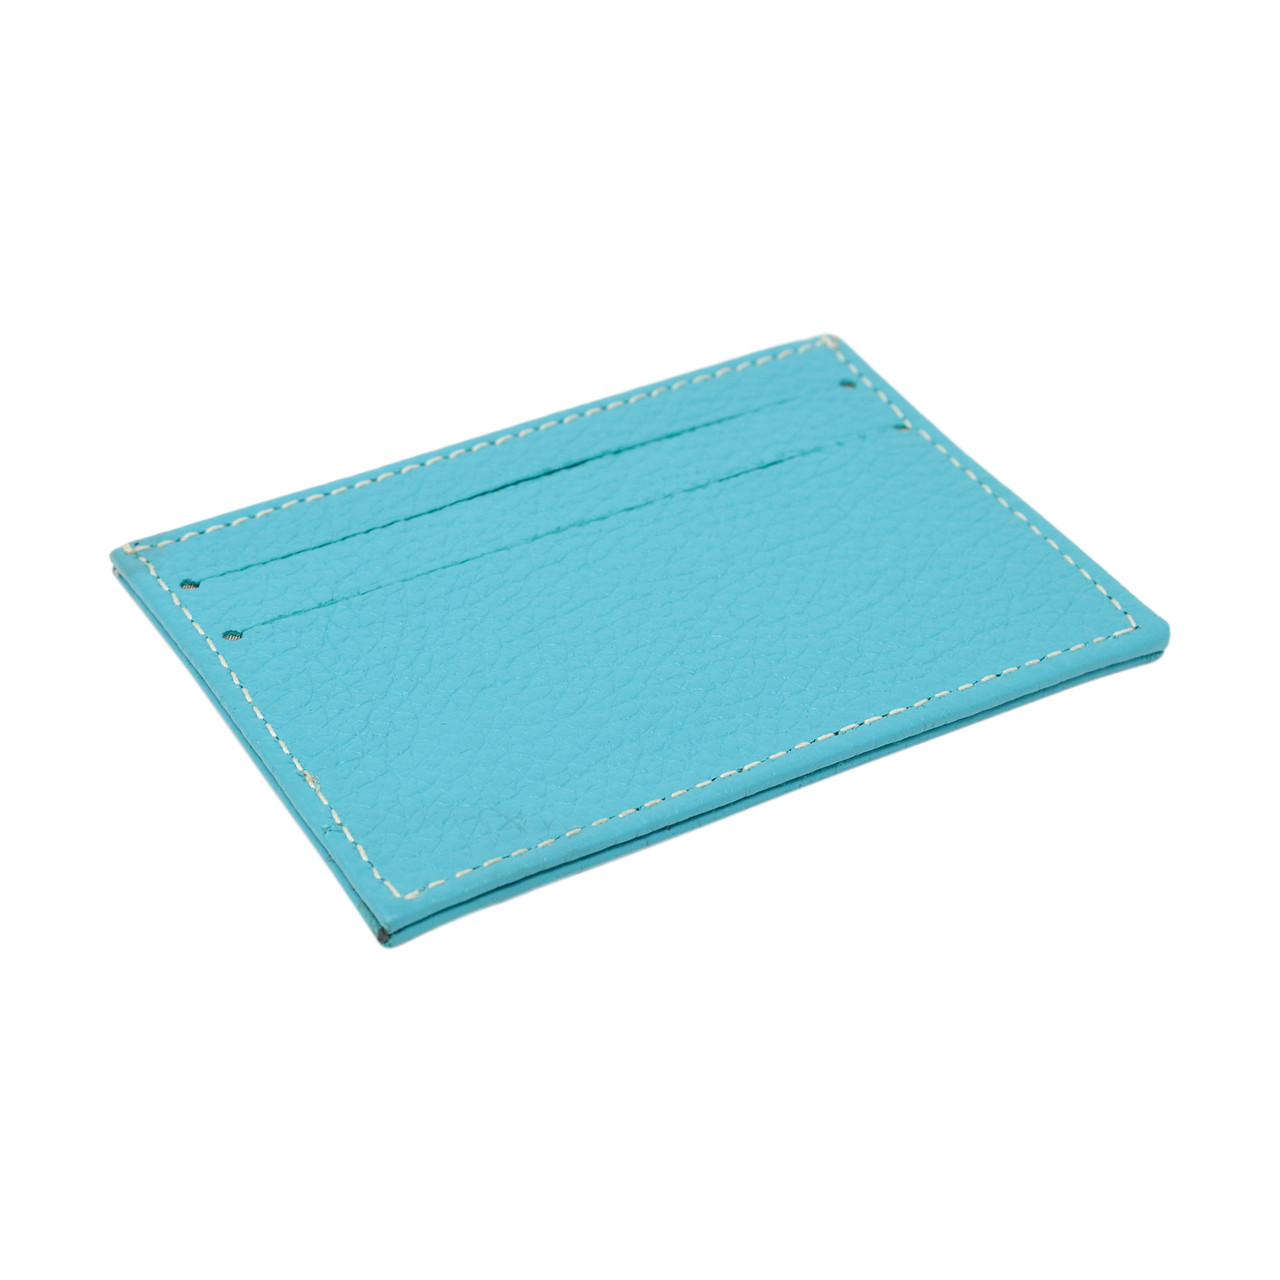 Leather Front Pocket Wallet with RFID Blocking in TEAL - Turtleback